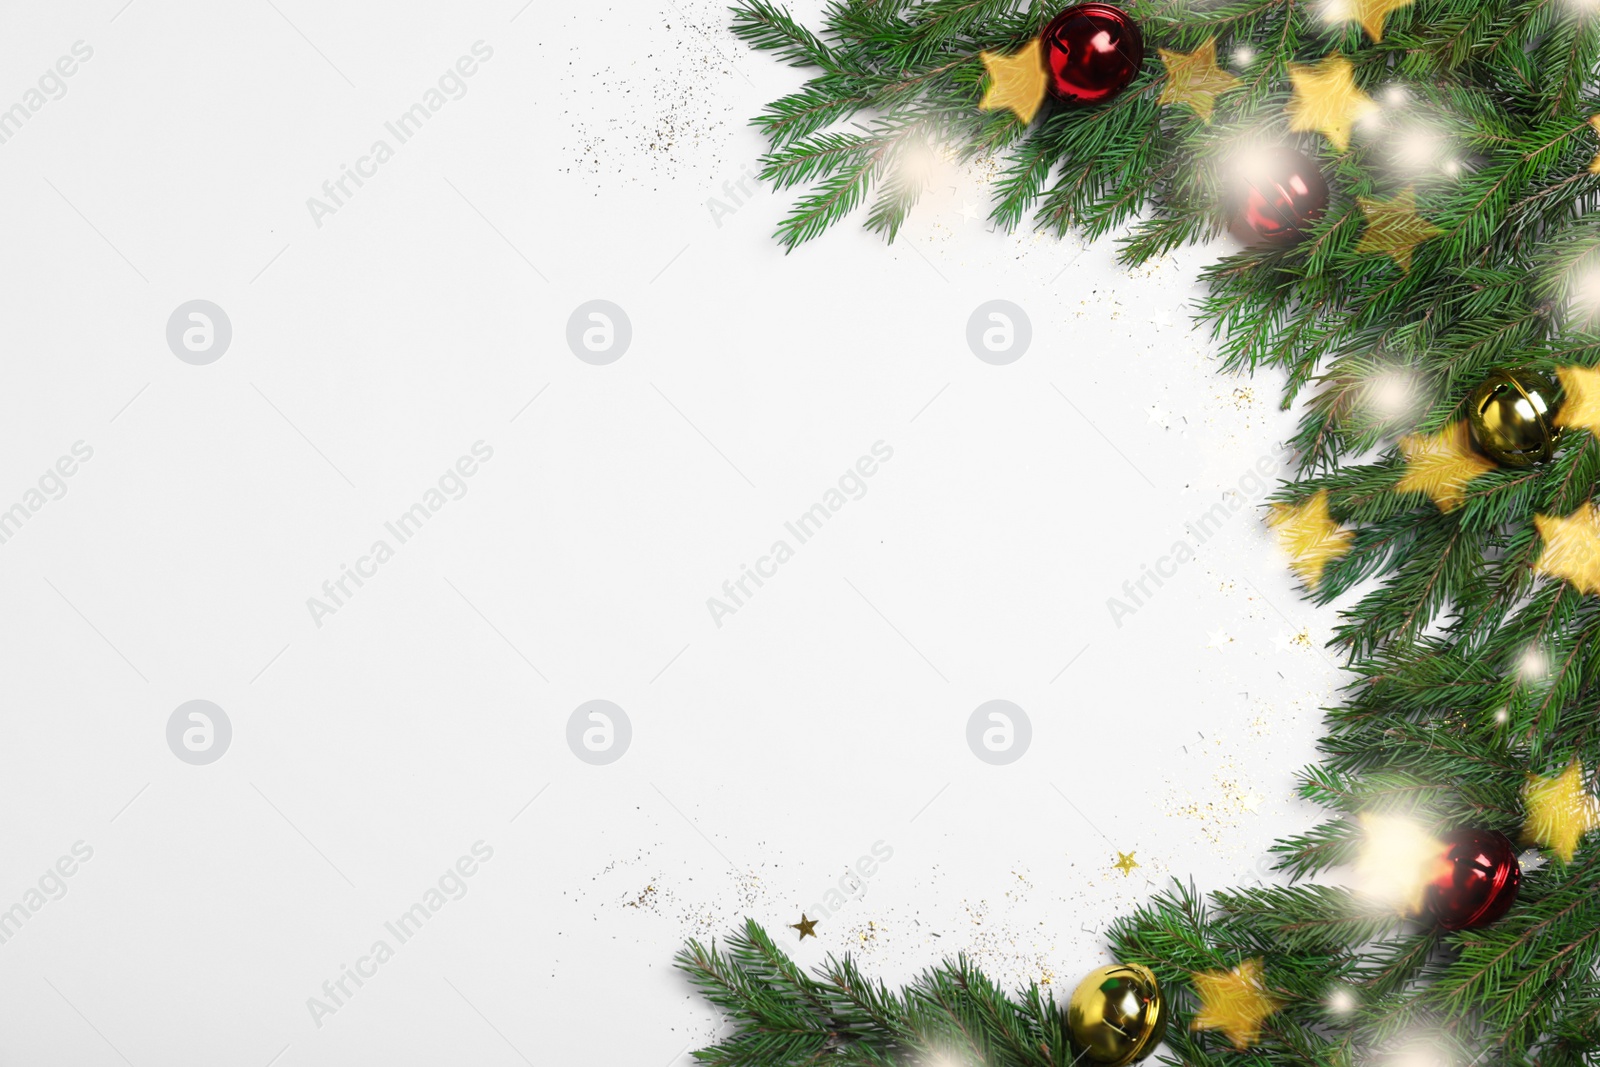 Photo of Christmas greeting card design. Flat lay composition with fir tree branches and festive decor on white background, space for text